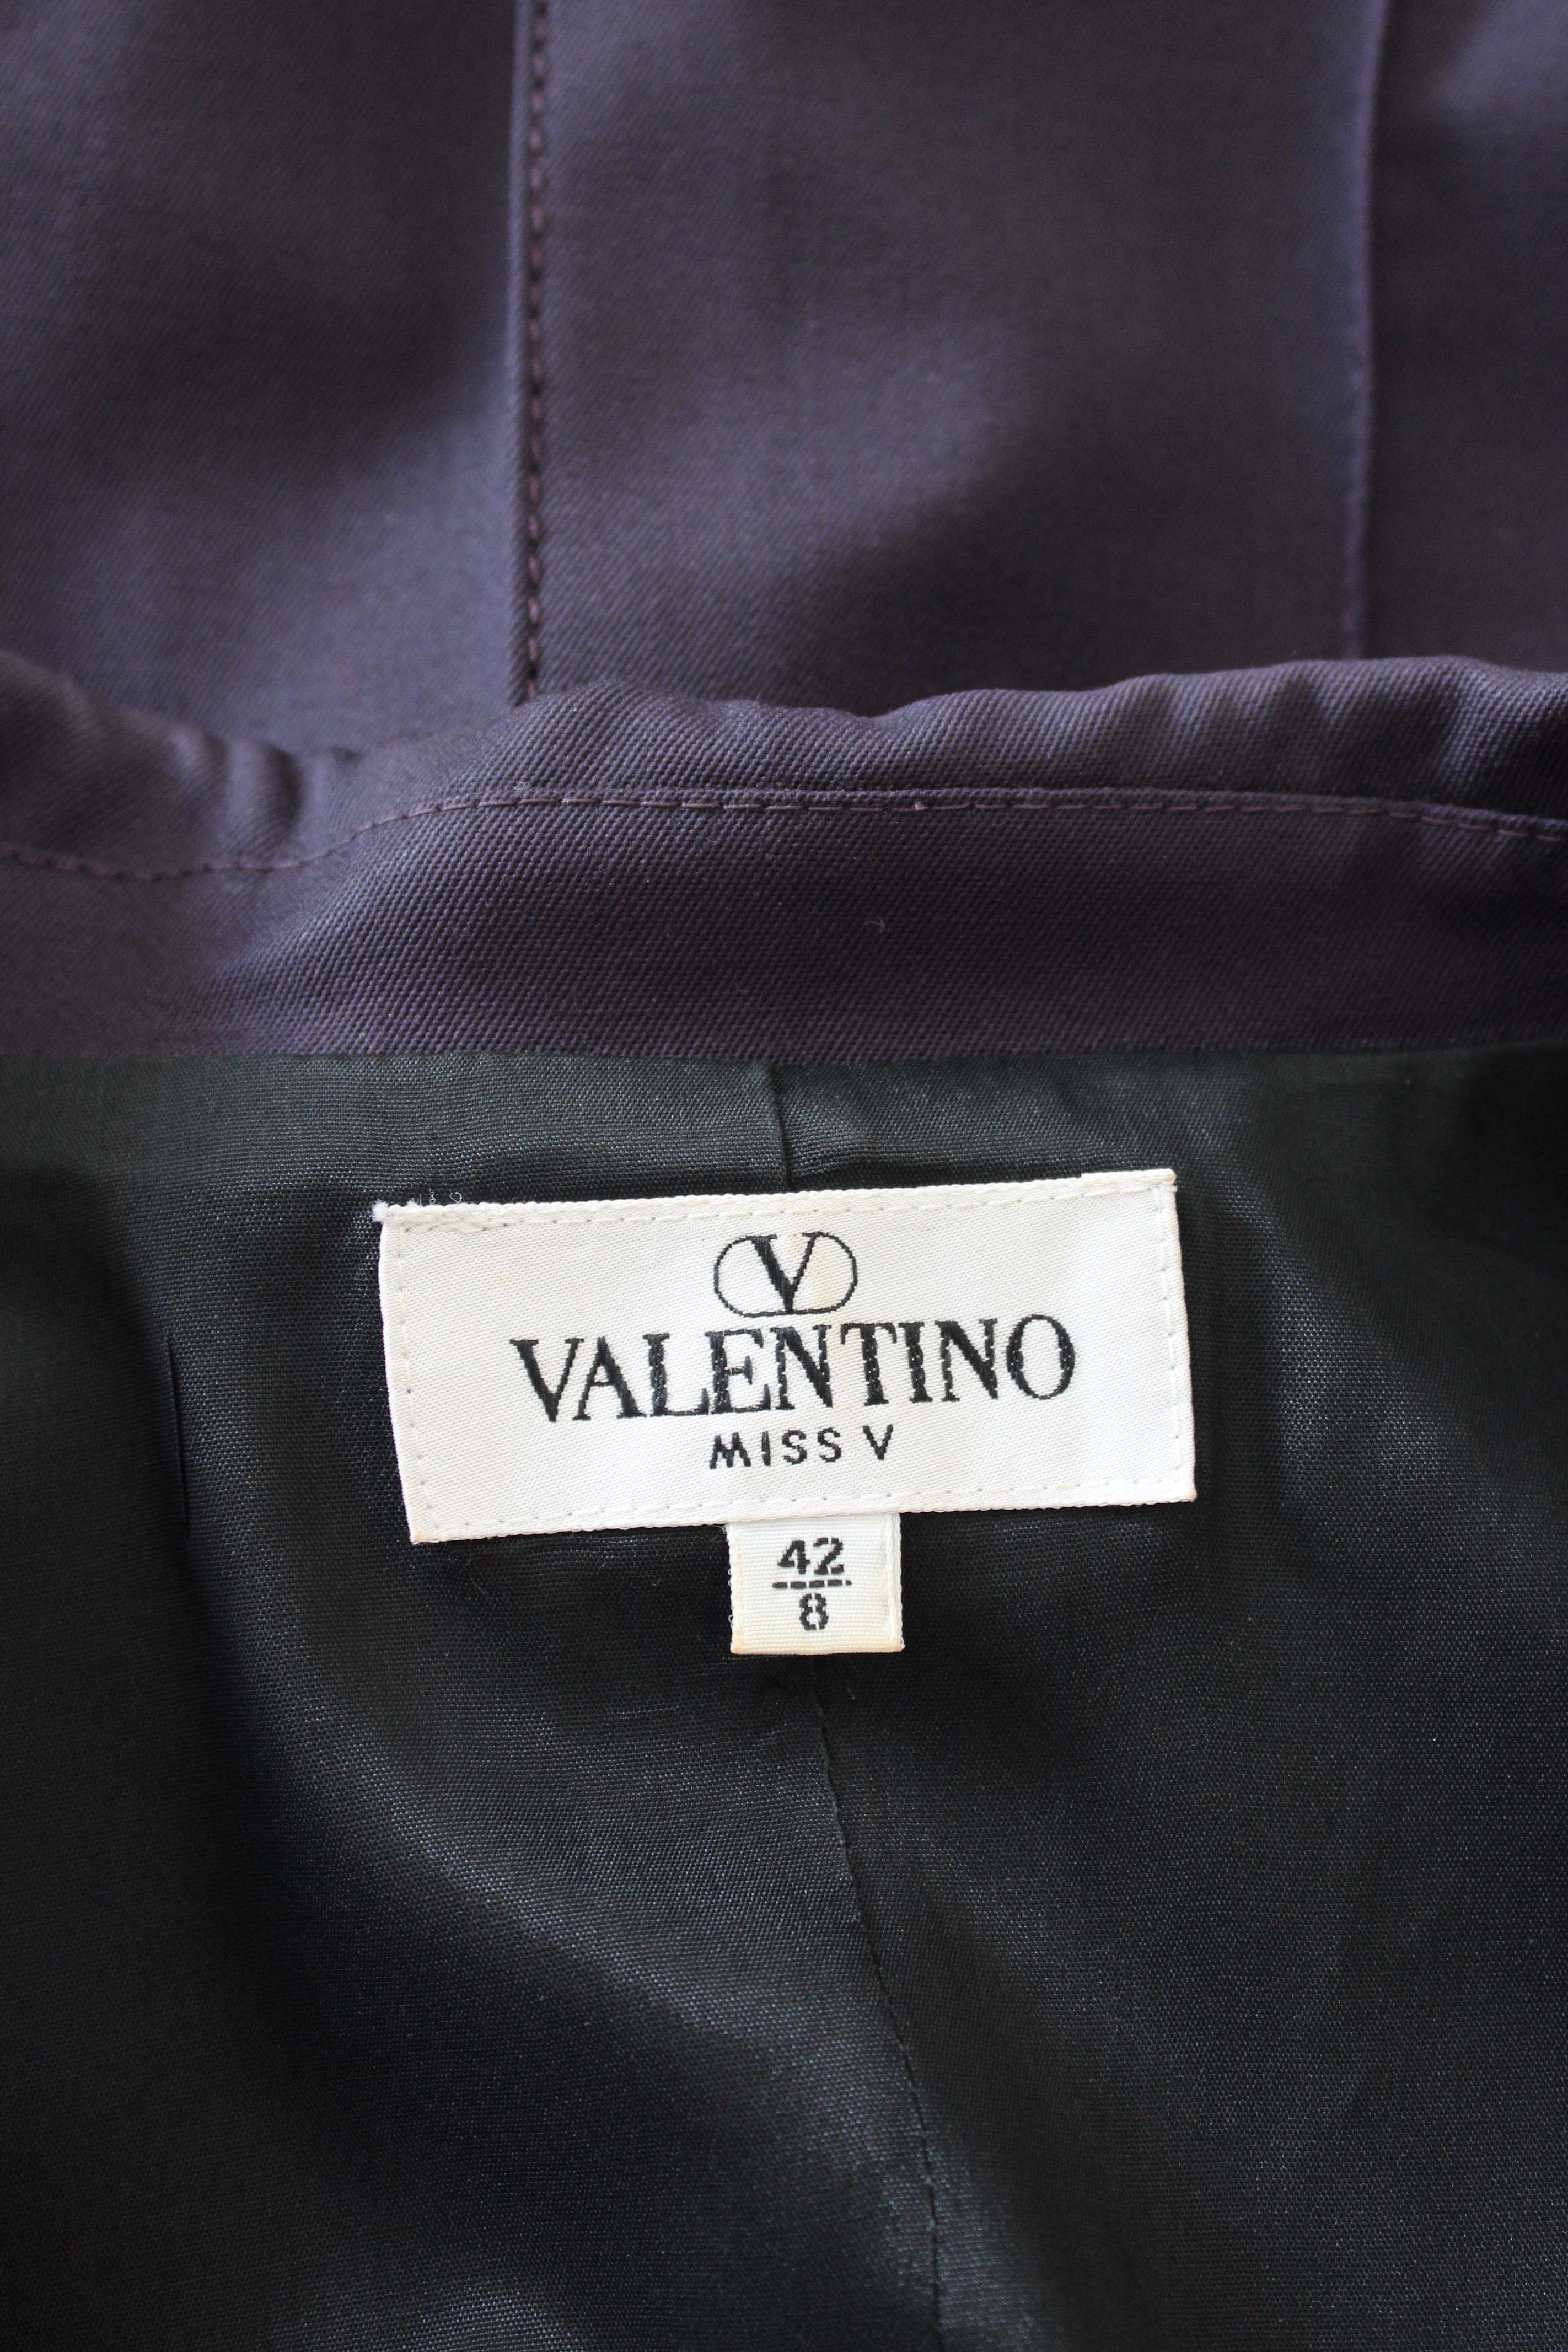 Valentino Miss V 90s vintage women's suit pants. Classic suit consisting of jacket and trousers. Fitted jacket with stitching along the length, high-waisted trousers. Blue color, 98% wool, 2% elastane fabric. Made in the USA.

Condition: